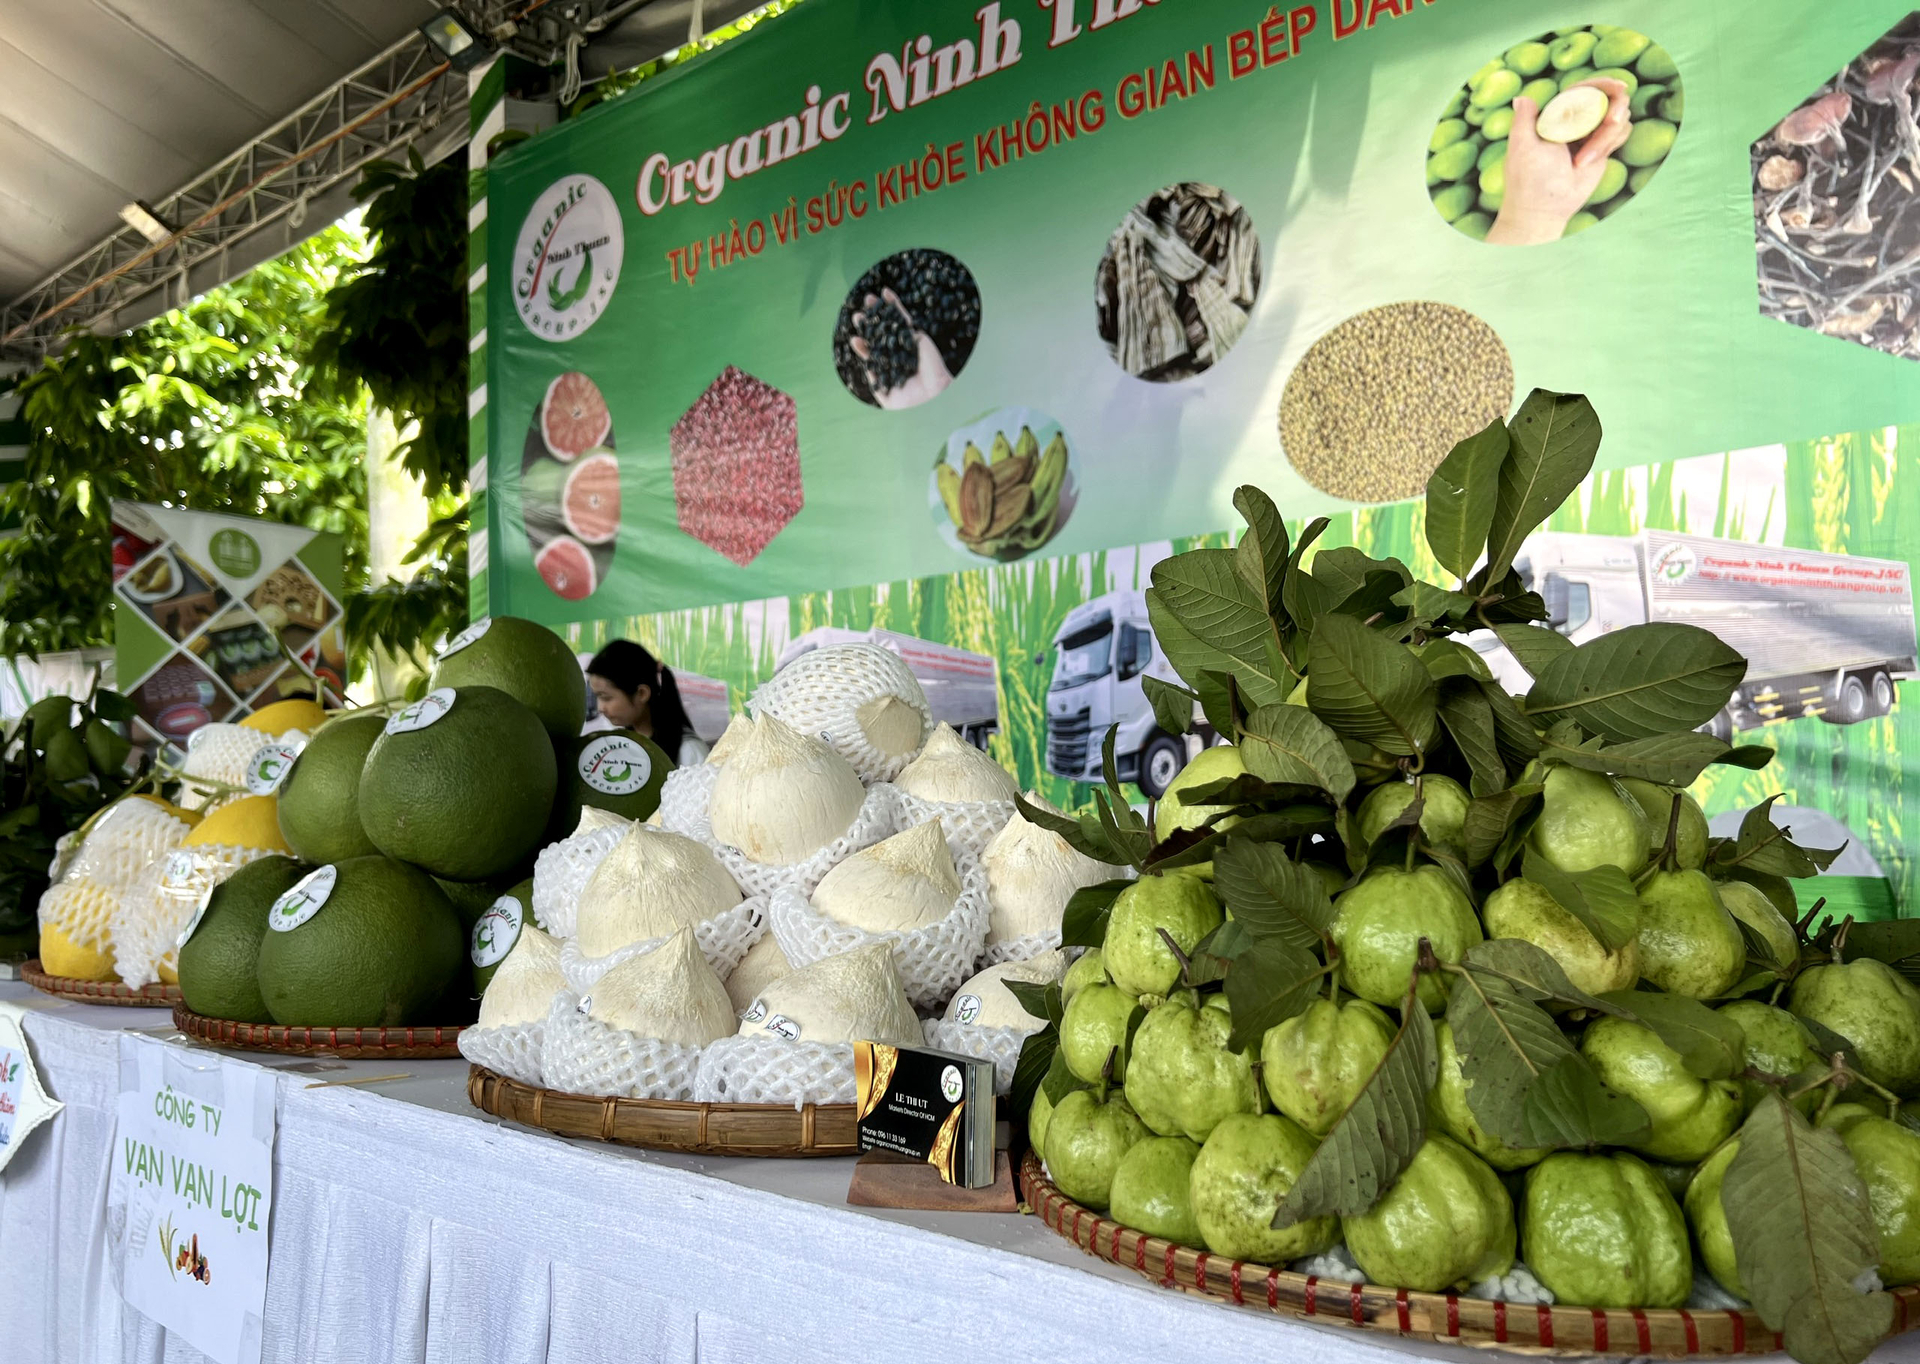 Organic Ninh Thuan will develop a variety of organic agricultural products in Ninh Thuan, including fruits. Photo: Son Trang.